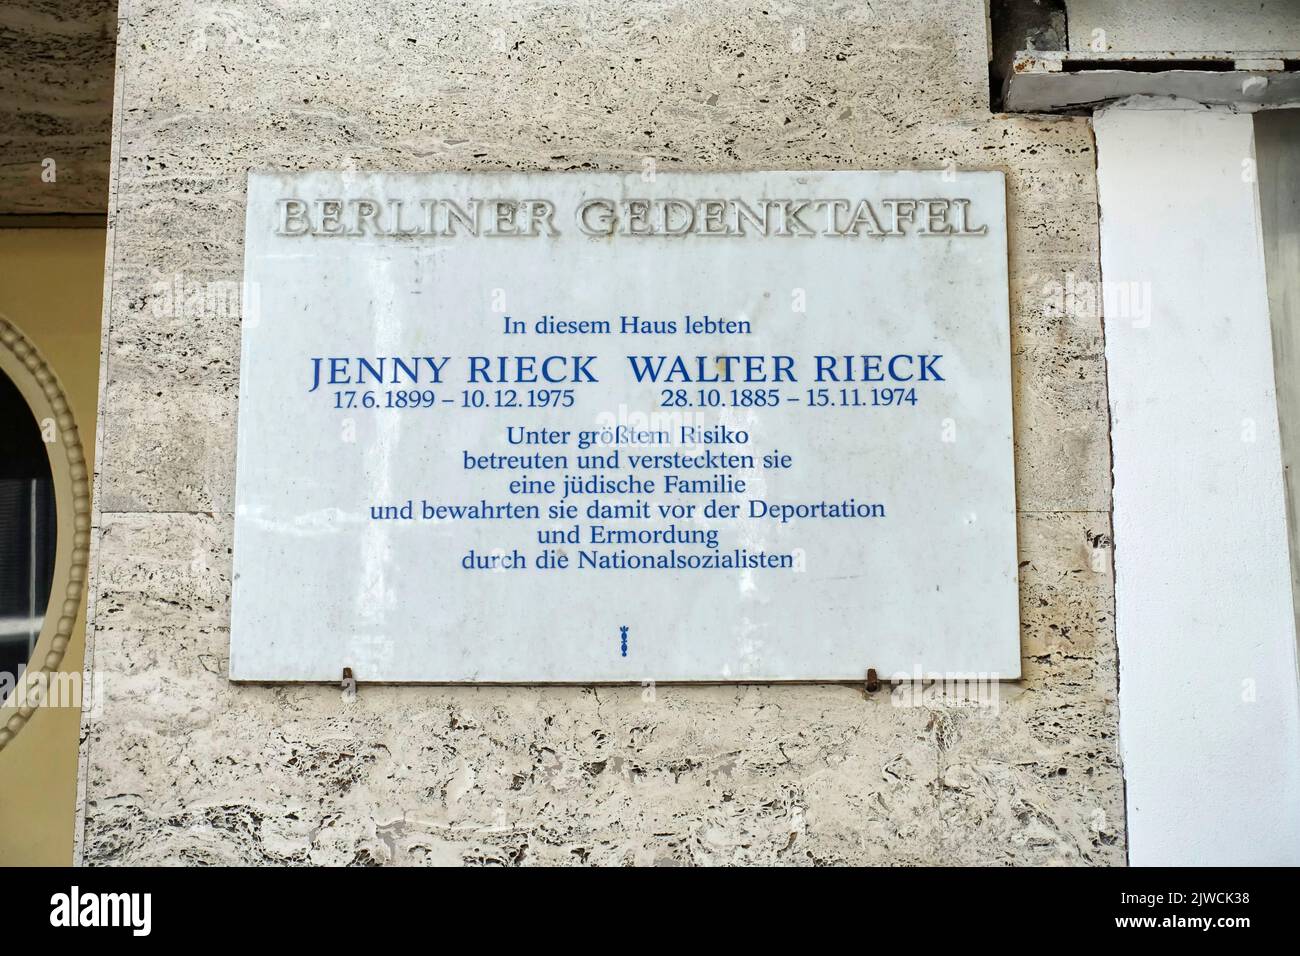 Memorial plaque of Jenny Rieck and Walter Rieck, Berlin, Germany Stock Photo